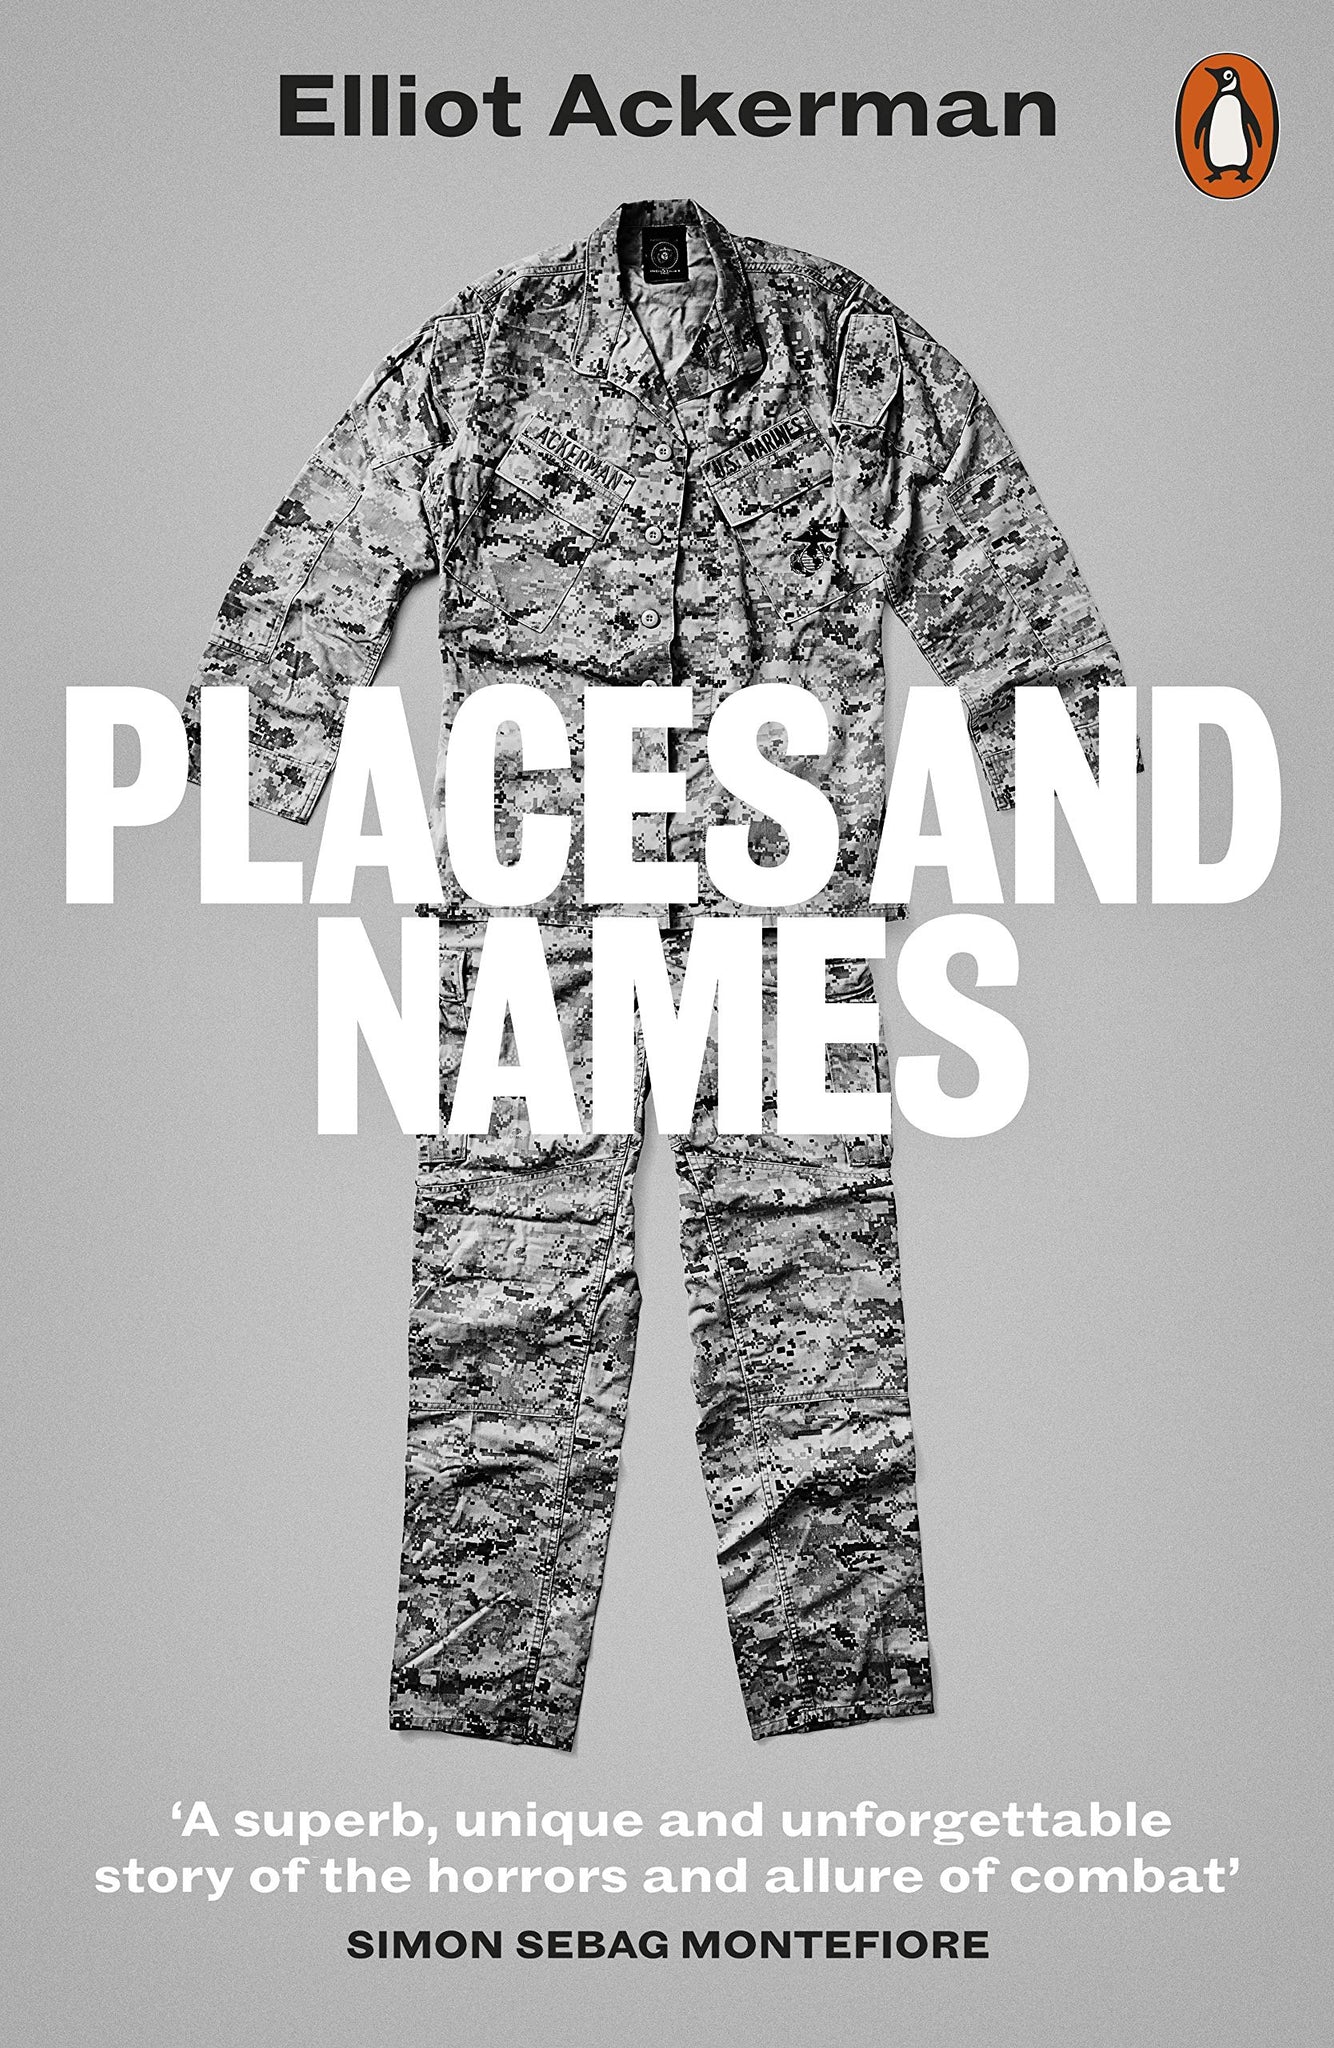 Places and Names: On War, Revolution, And Returning